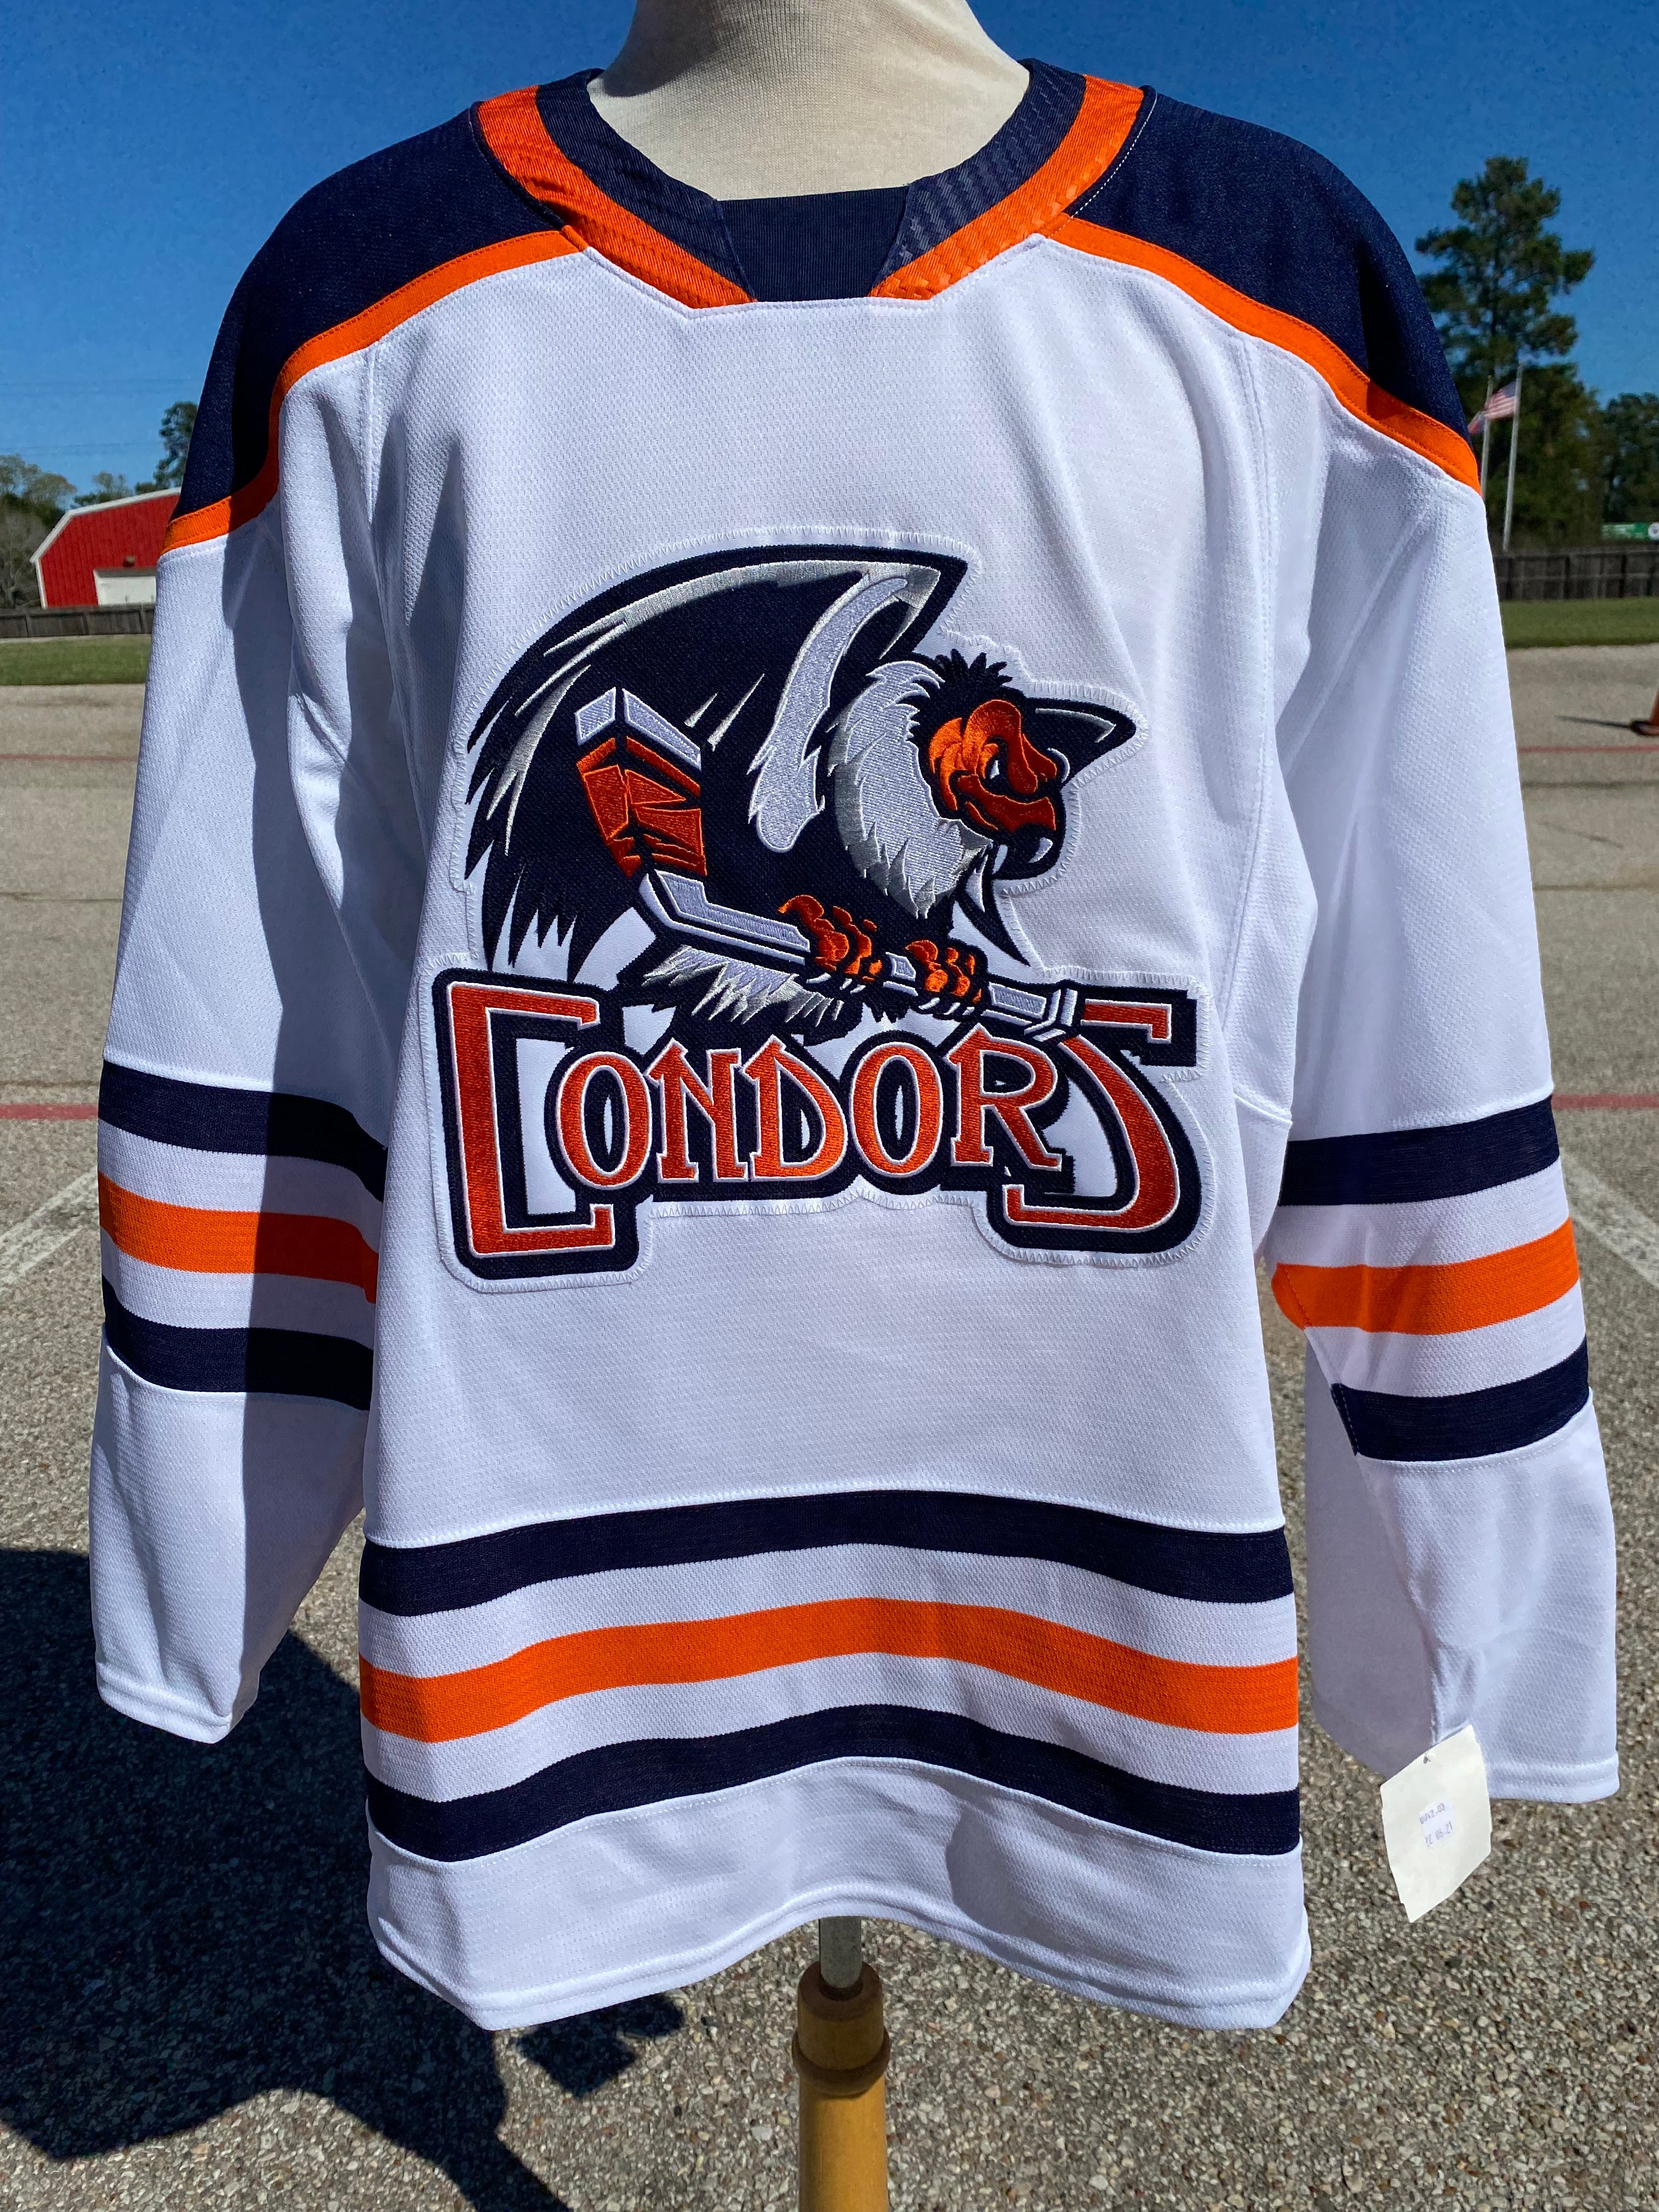 Been wanting a Bakersfield Condors jersey for a while now and so happy I  was able to get one with the 20th anniversary patch! This jersey will  eventually end up as a